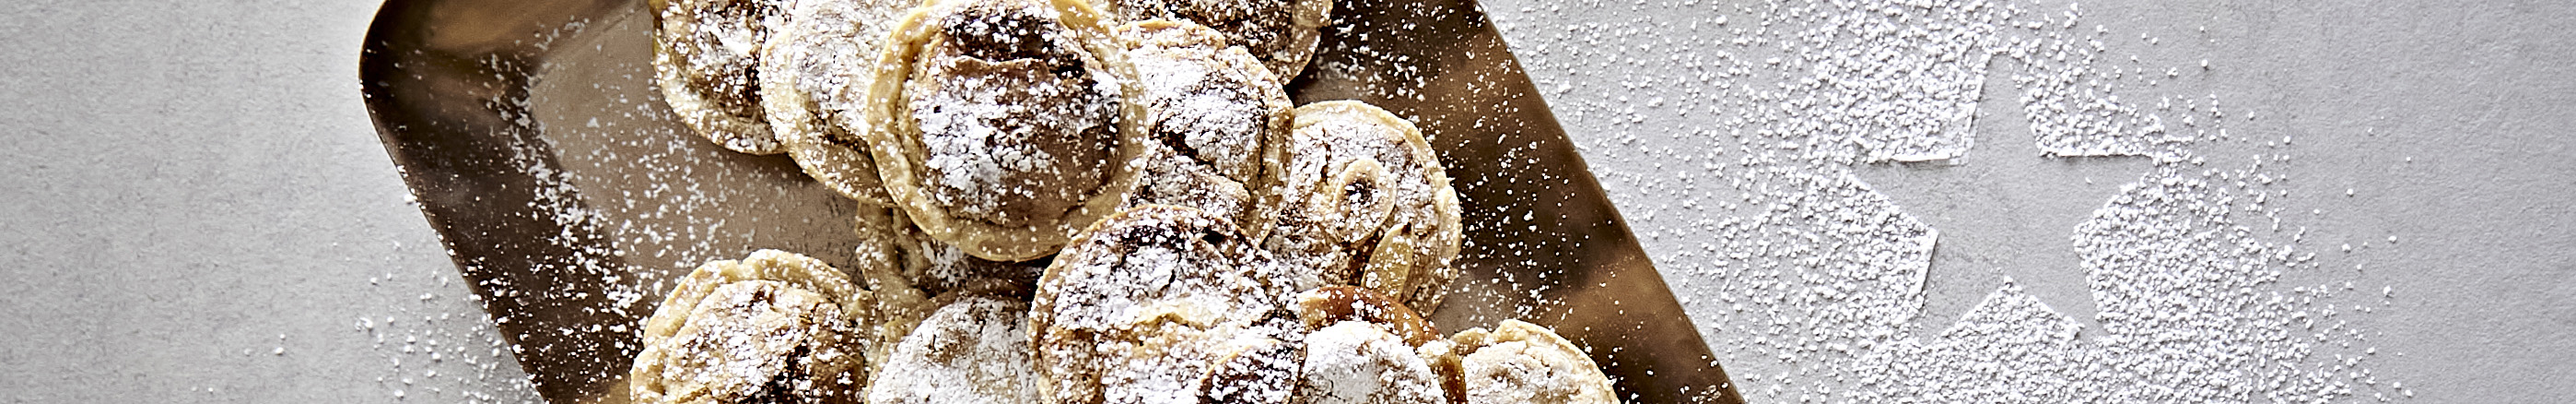 Italian Style Mince Pies with Ricciarelli Topping